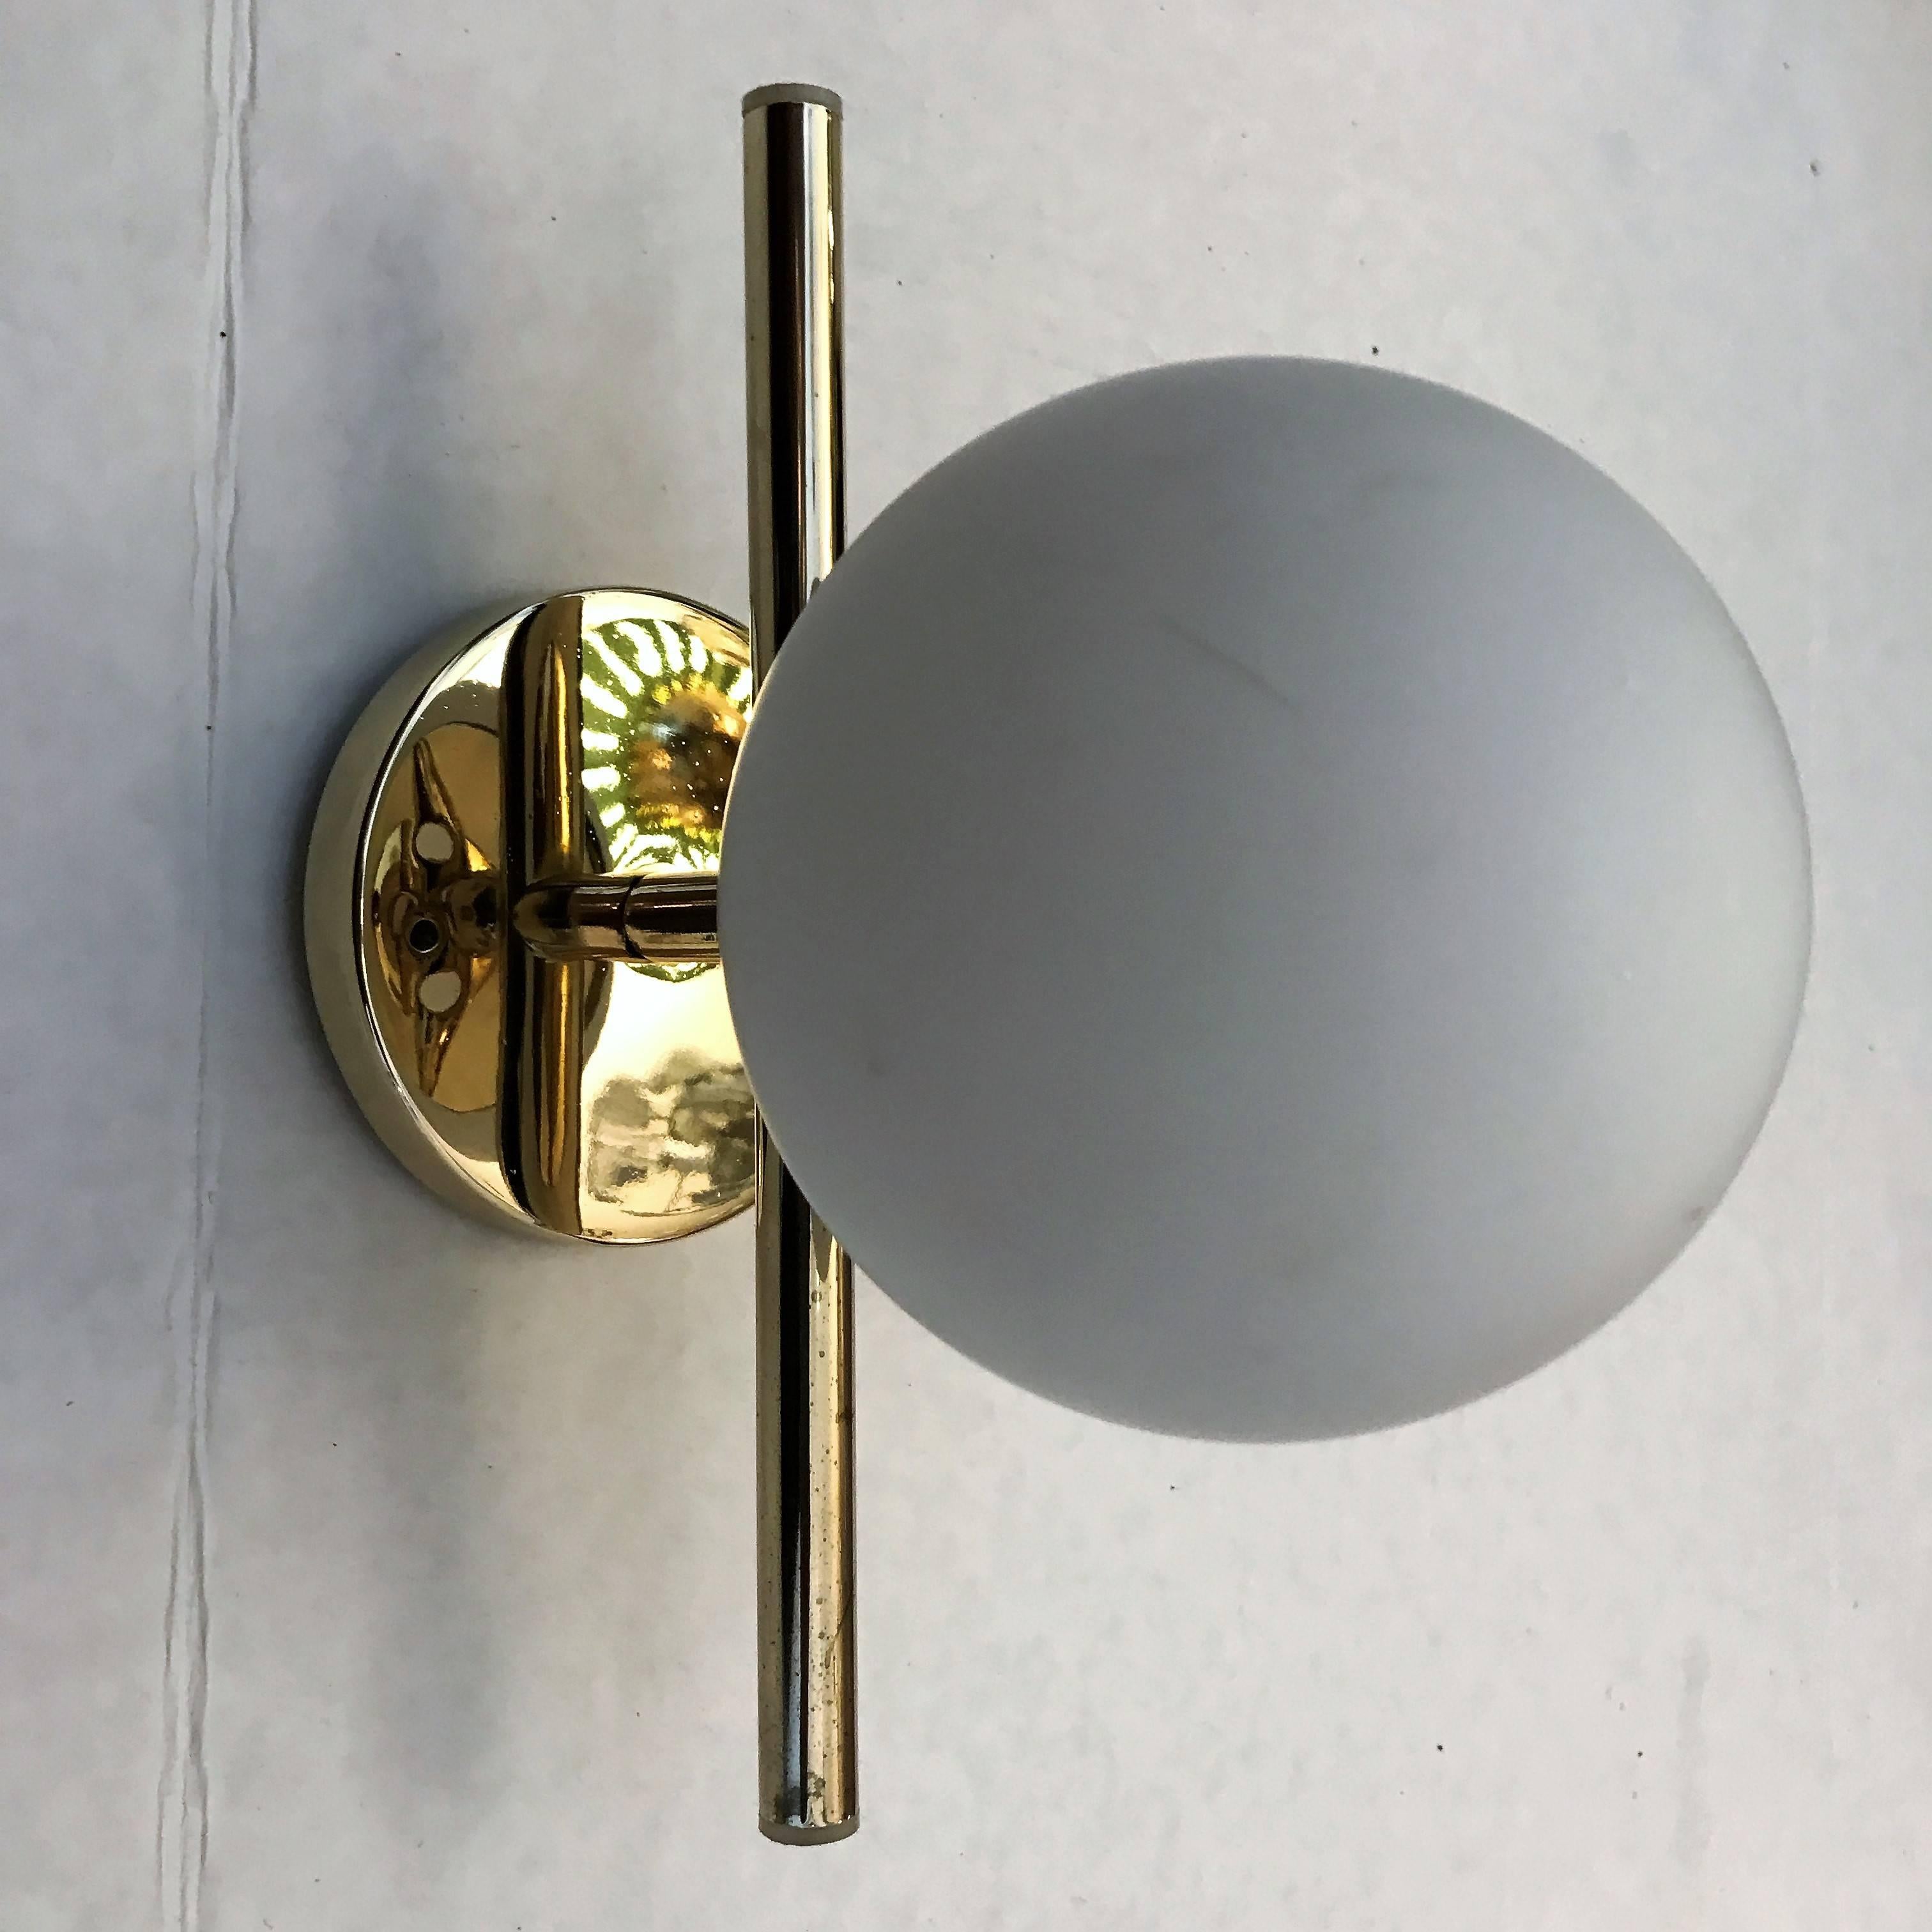 A great set of three sleek modern 1950s polished brass wall lights with frosted glass globes shades. Newly rewired.